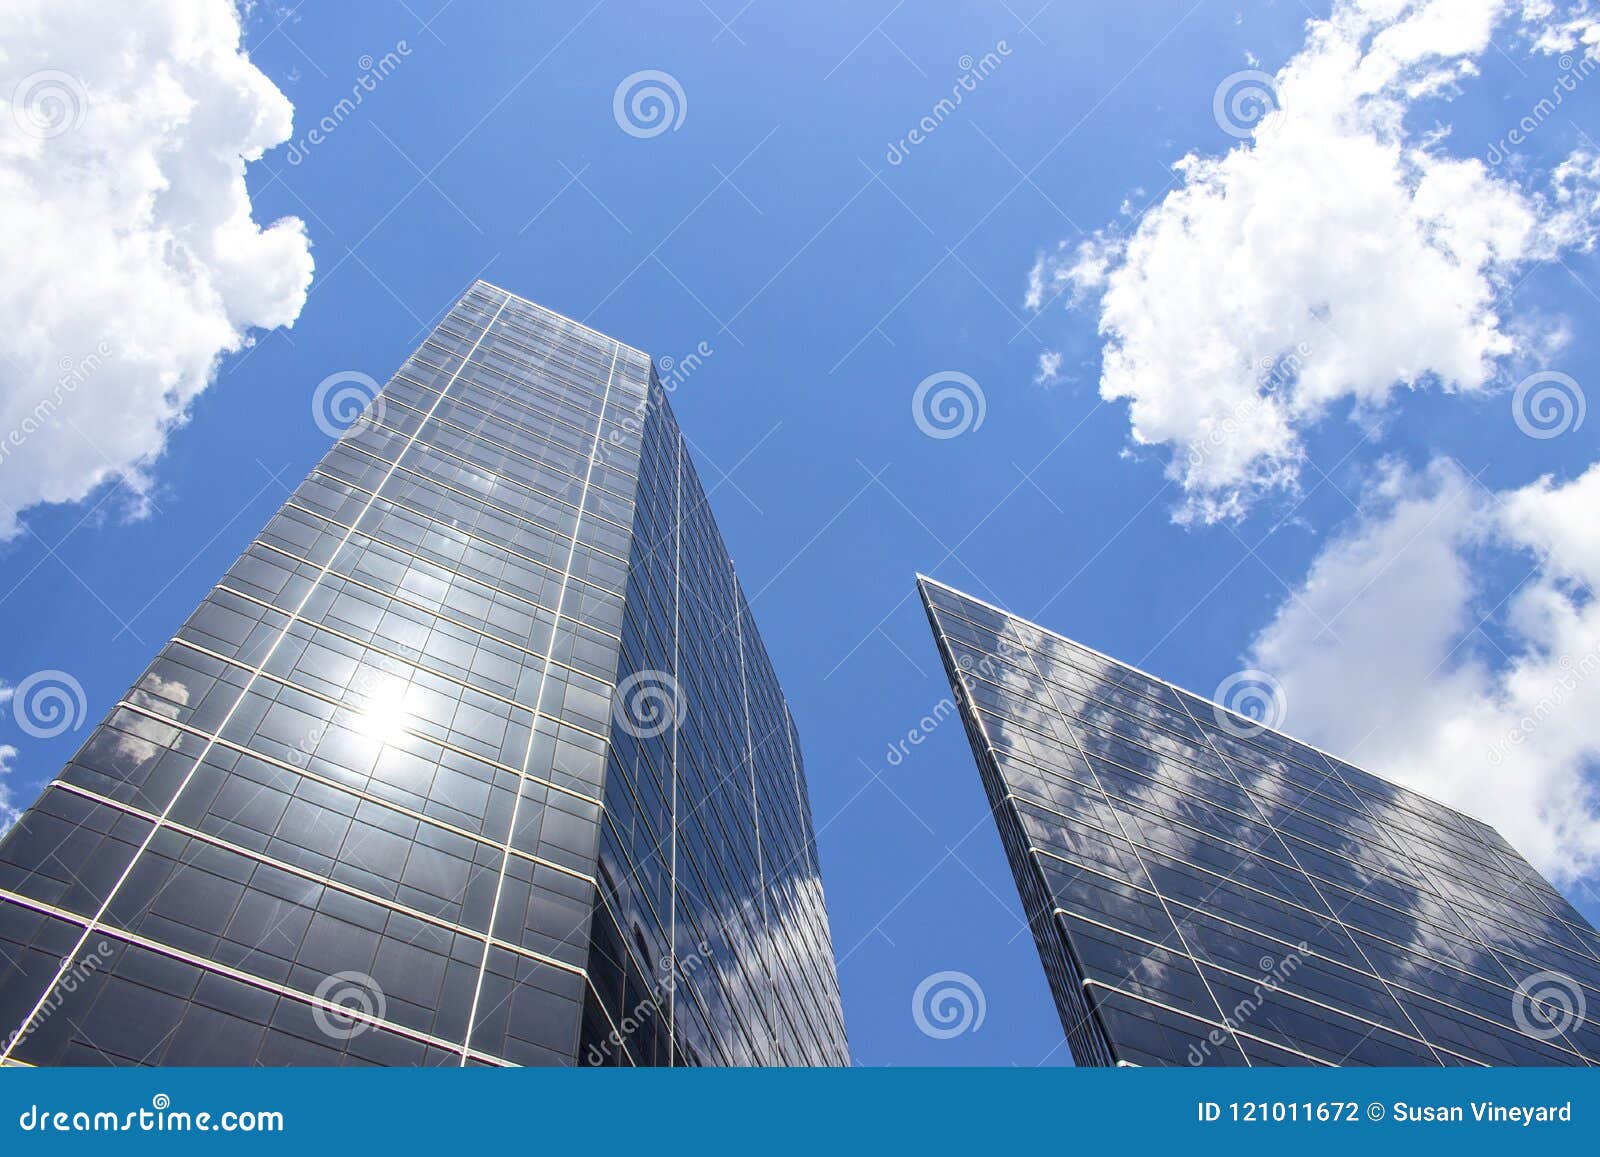 reflection of sky and clouds on tall modern skyscrapers looking up with lens flare